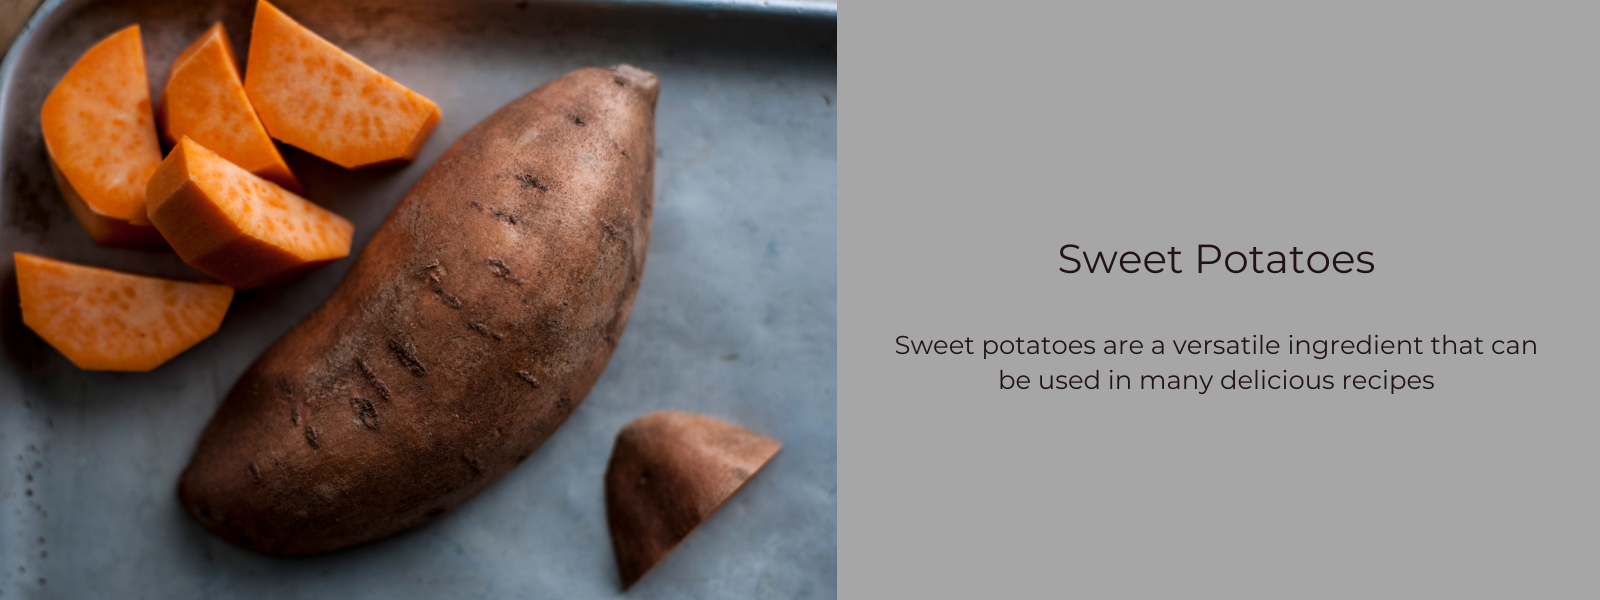 Sweet Potatoes - Health Benefits, Uses and Important Facts